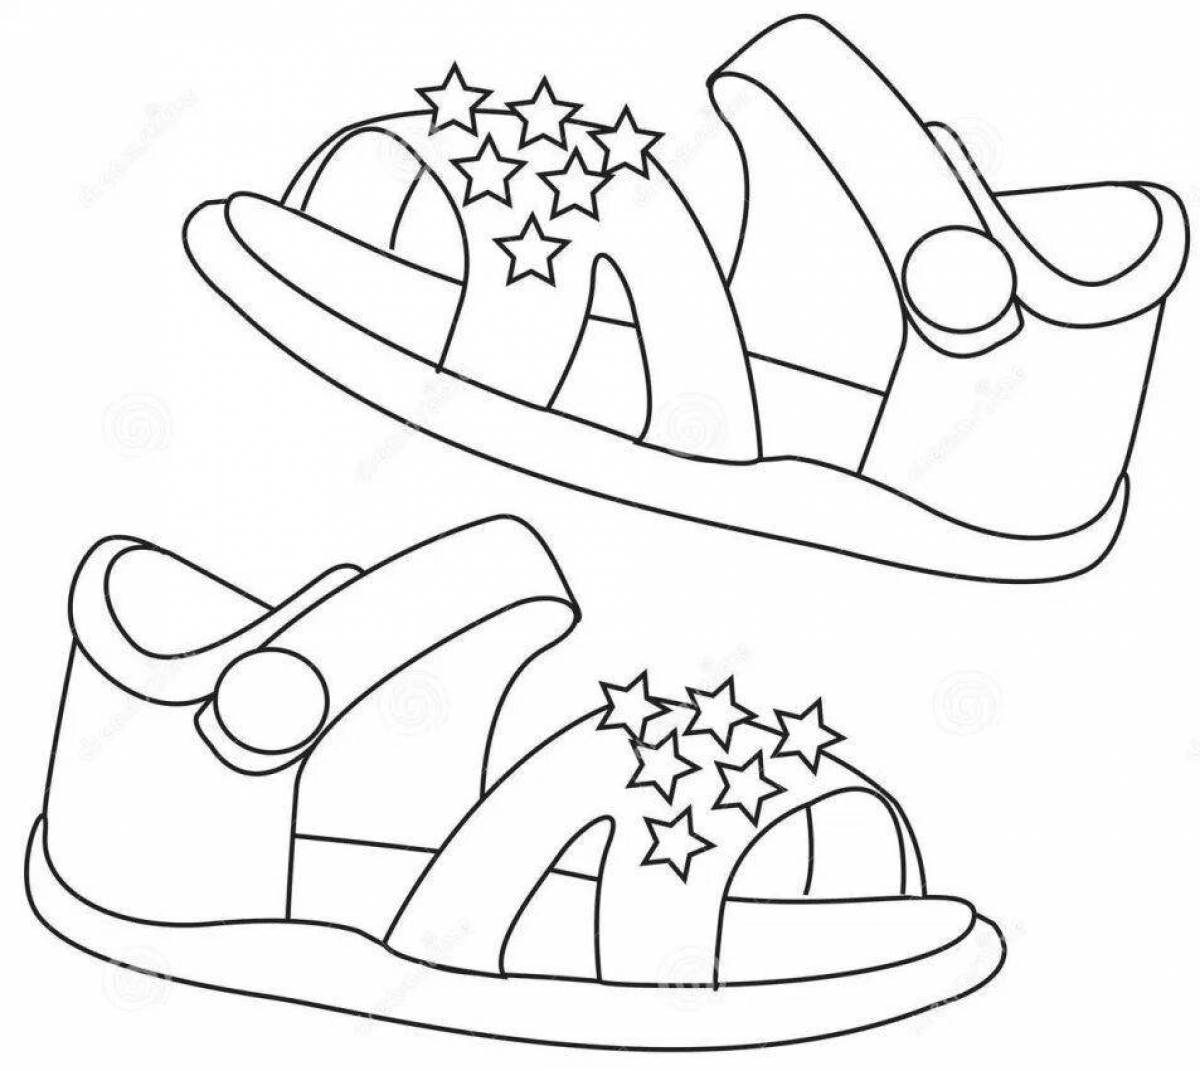 Amazing shoe coloring book for 4-5 year olds